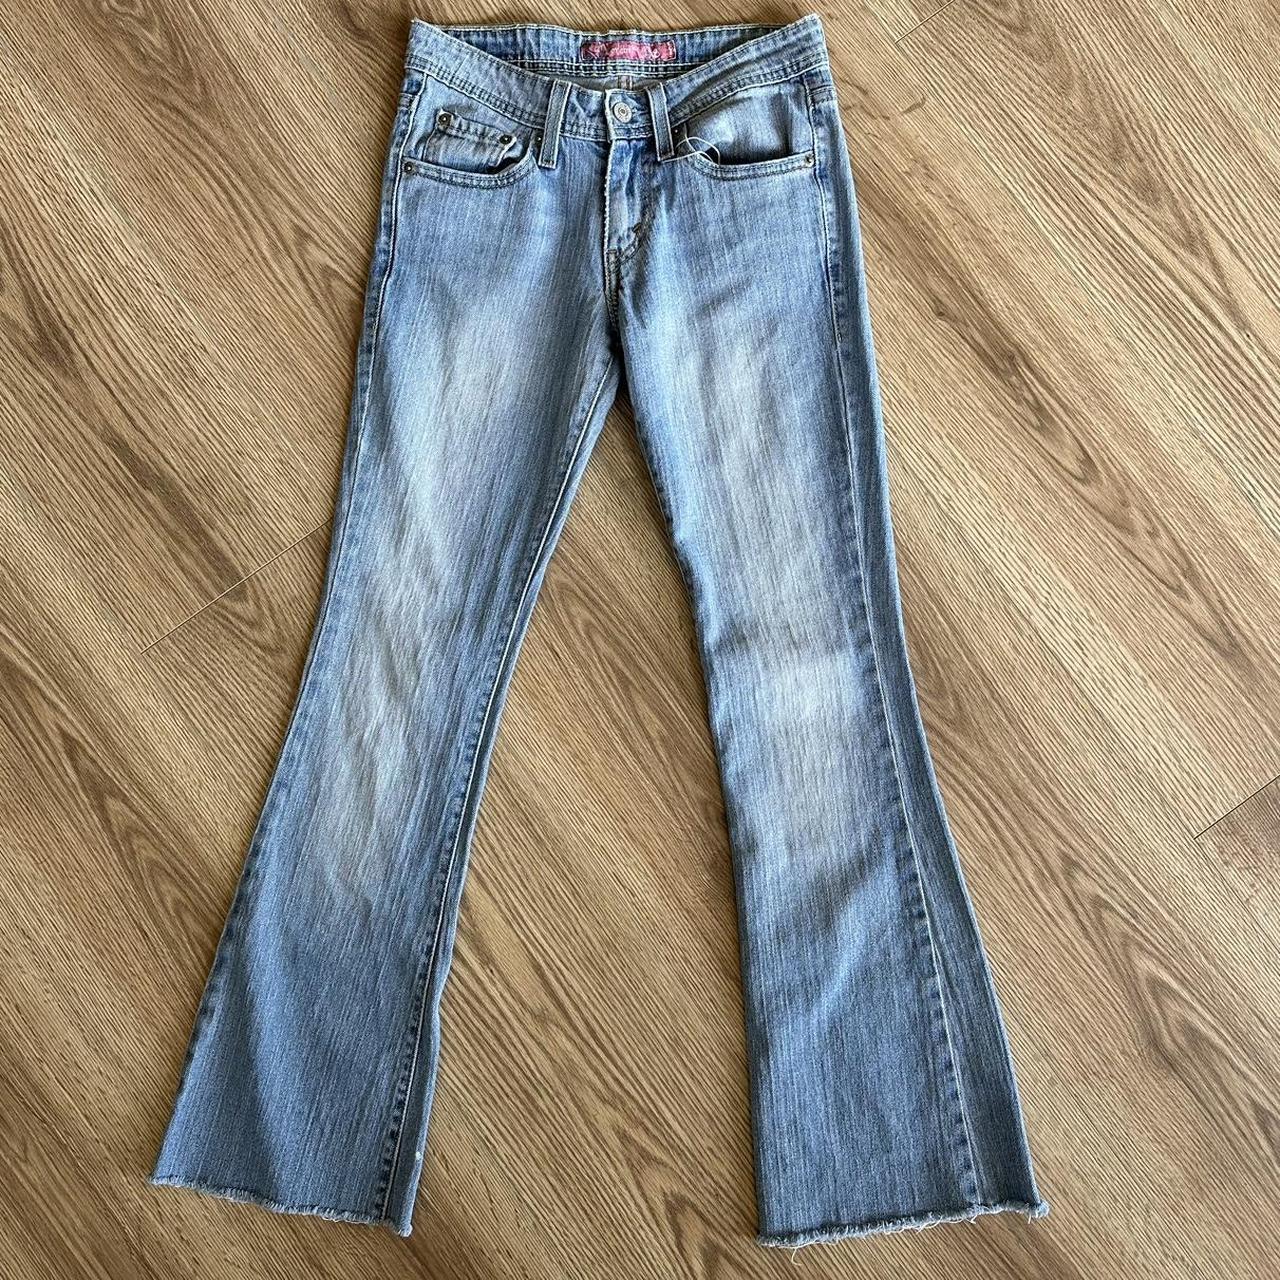 Super low rise Levi’s Tag says 0Long but the... - Depop